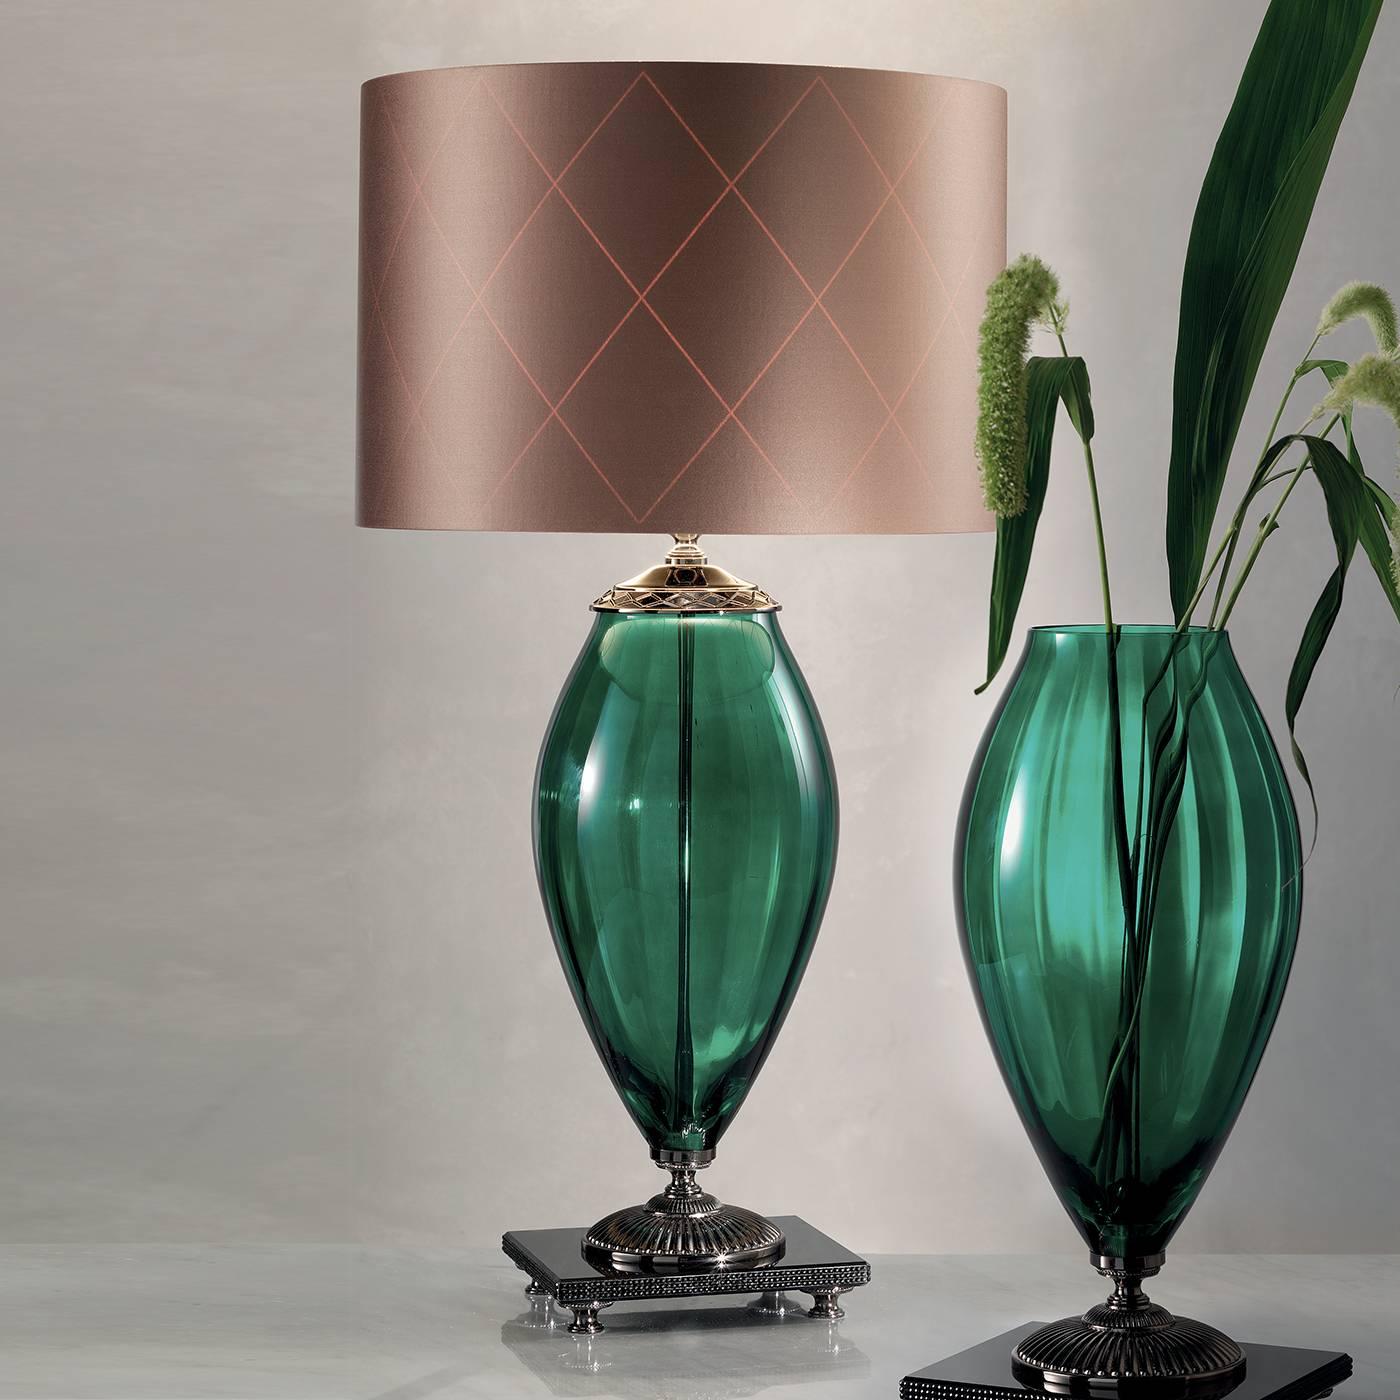 A glamorous accent perfect for any space, this eye-catching lamp showcases a green glass body with a gold-plated decorative accent around the top. Resting atop a black square marble base accented with black rhinestones, the lamp sits on an ornate